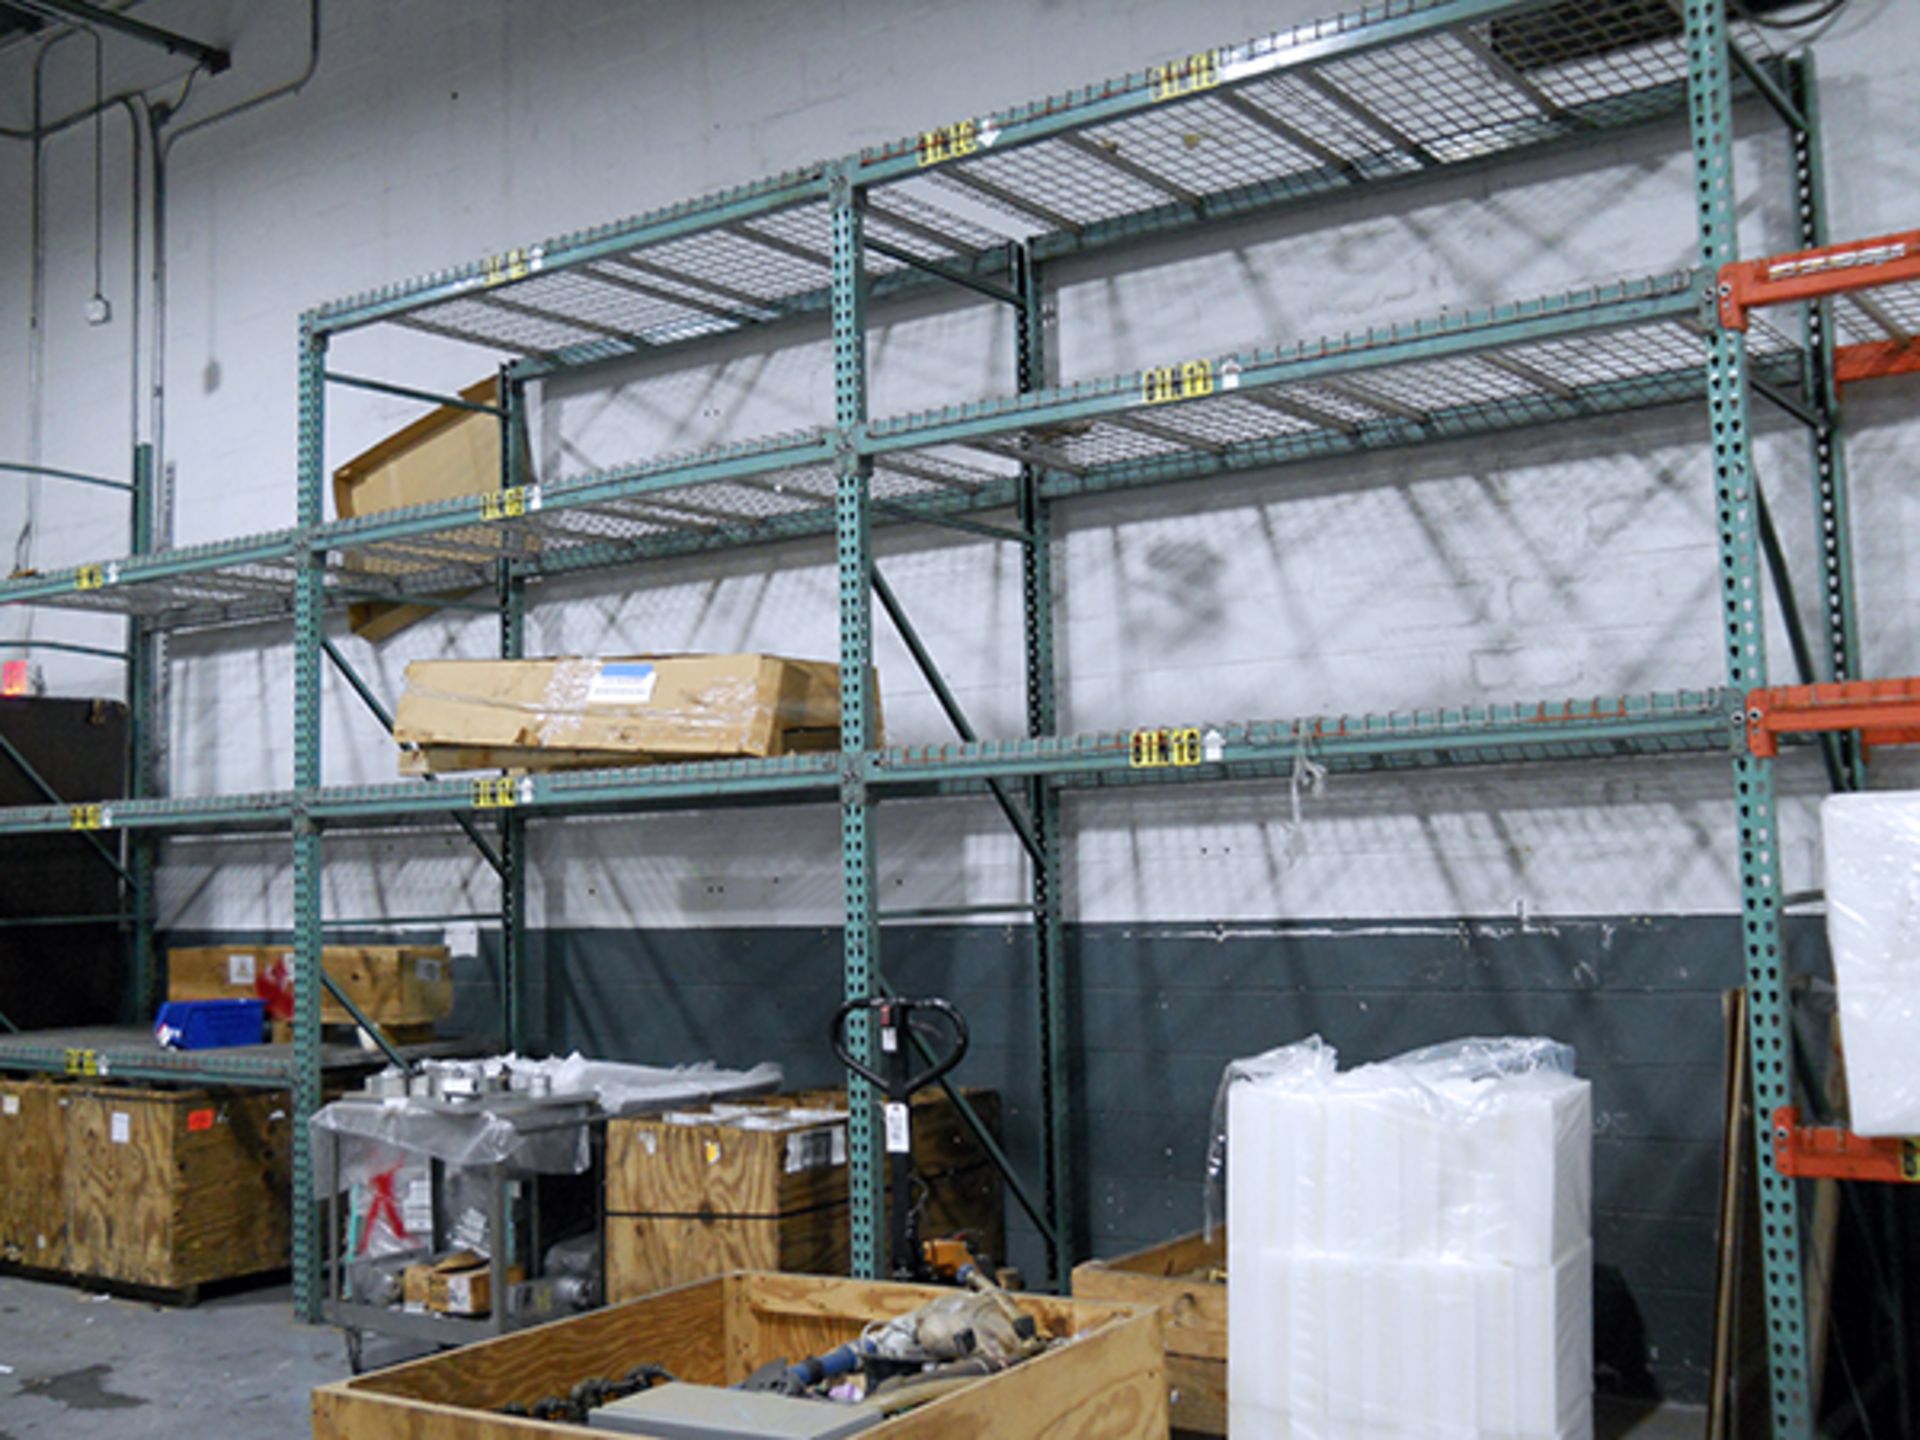 Caged Storage Area & 9 Sections of Pallet Racking - Image 4 of 7